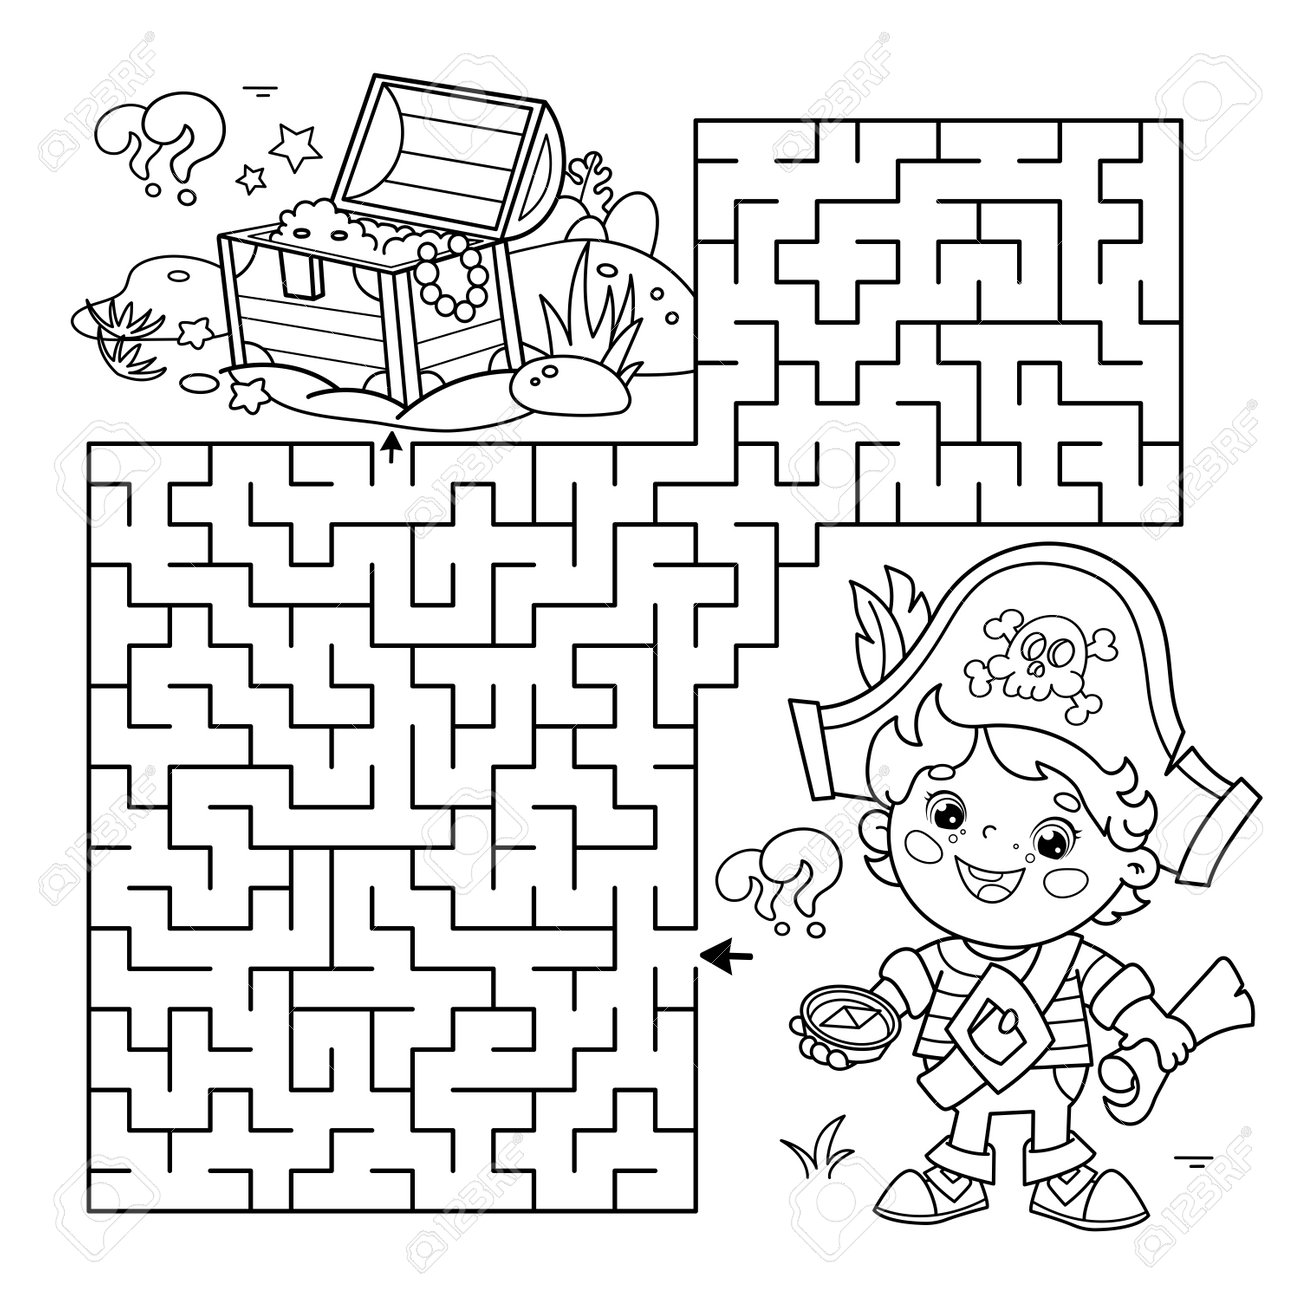 Maze or labyrinth game puzzle coloring page outline of cartoon little pirate with treasure chest coloring book for kids royalty free svg cliparts vectors and stock illustration image